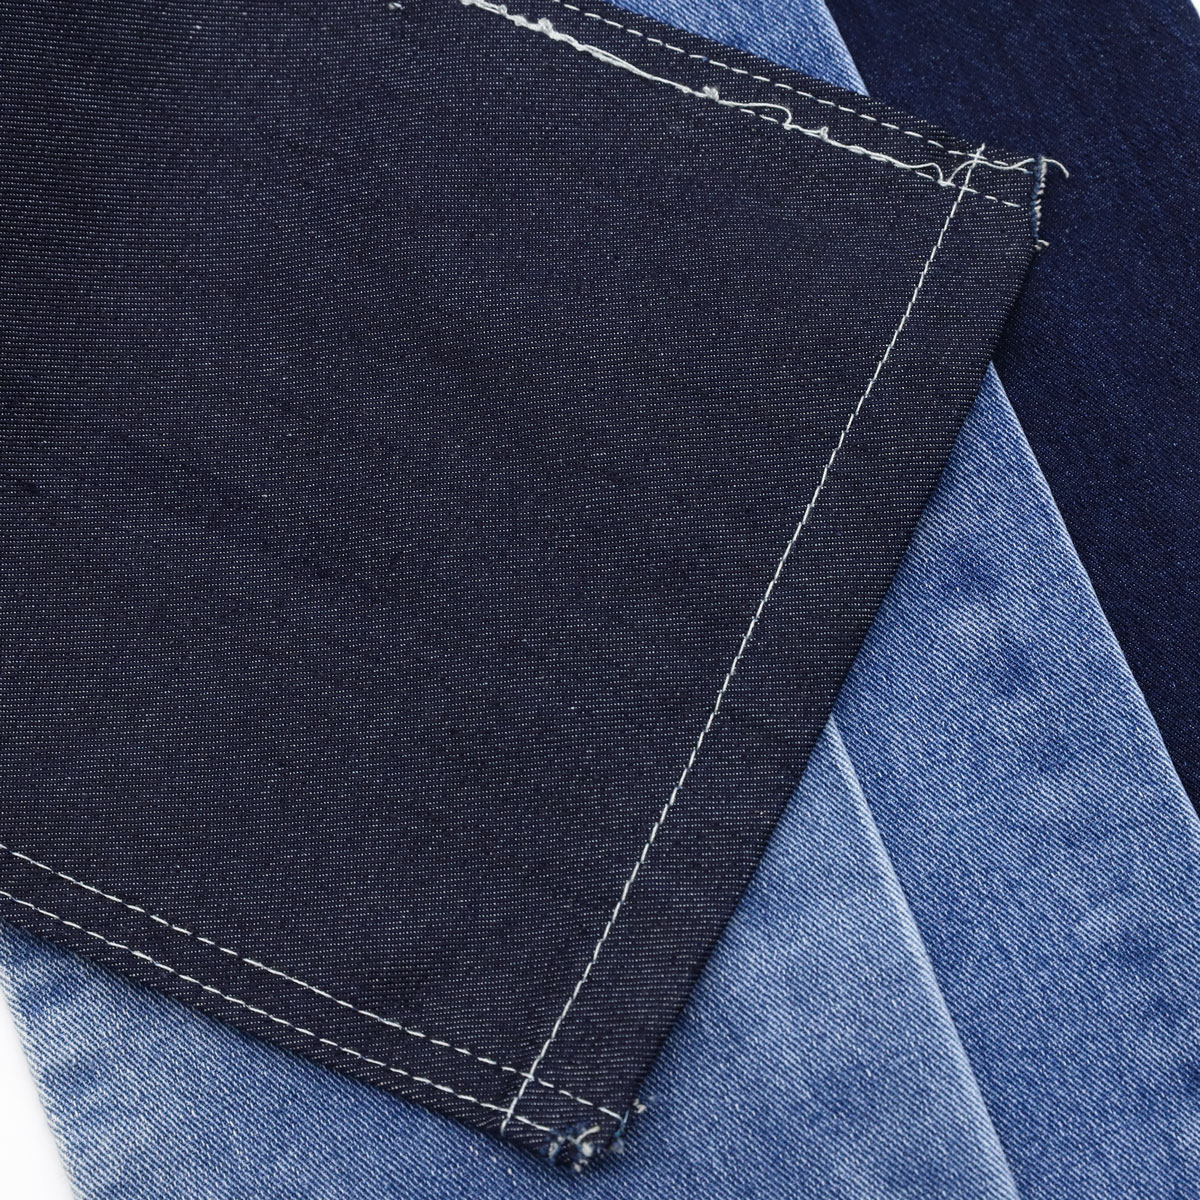 Why You Want a Buying Denim Fabric 1